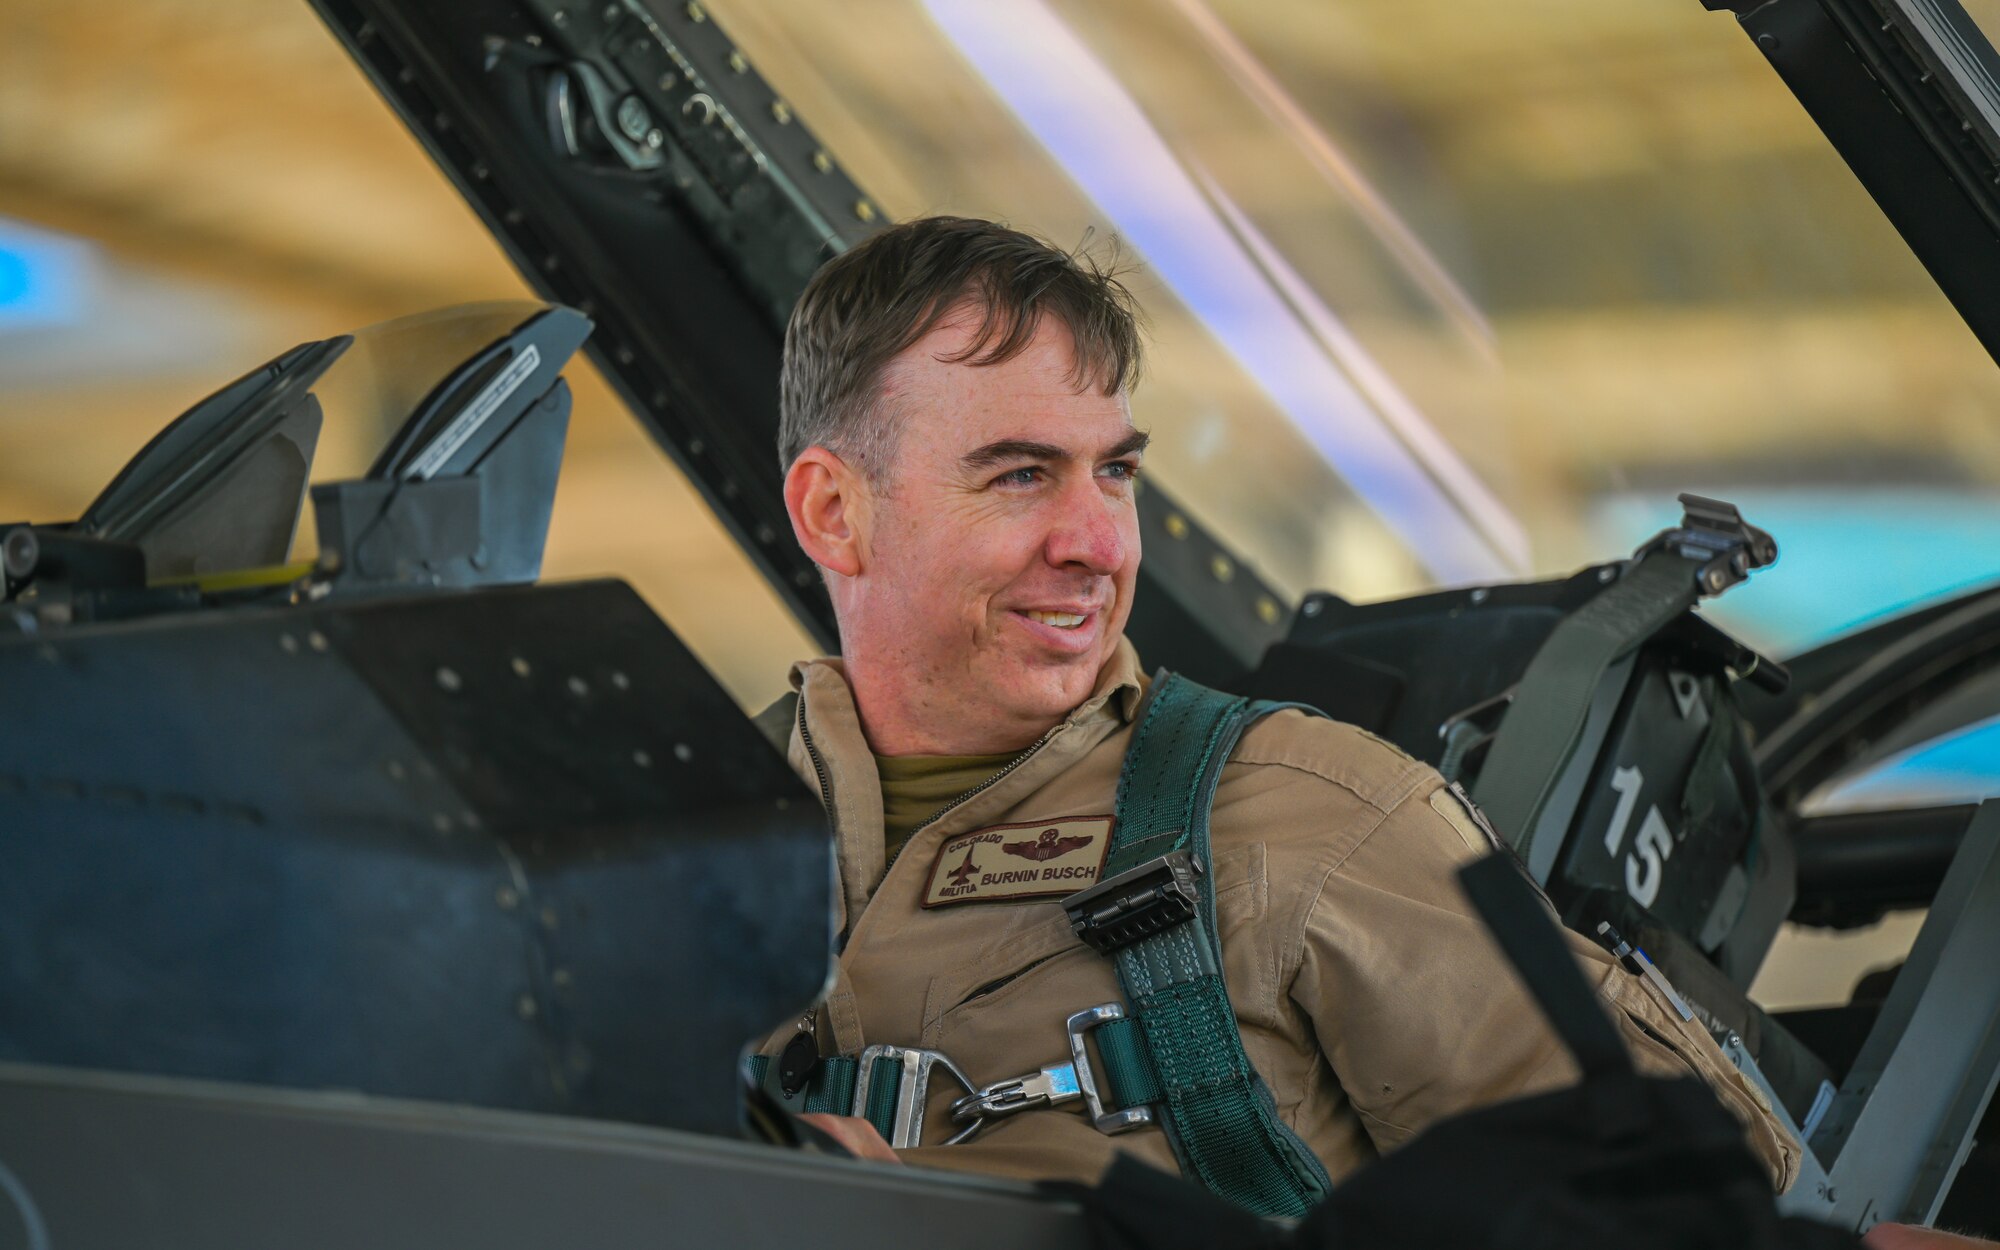 Col. Benjamin Busch, 378th Expeditionary Operations Group commander, sits in the cockpit of an F-16 Fighting Falcon while being refueled at King Abdulaziz Air Base, Kingdom of Saudi Arabia, Feb. 16, 2022. Service members from the U.S., KSA, Pakistan and Bahrain conducted combined operations to better integrate partner capabilities. (U.S. Air Force photo by Staff Sgt. Christina A. Graves)